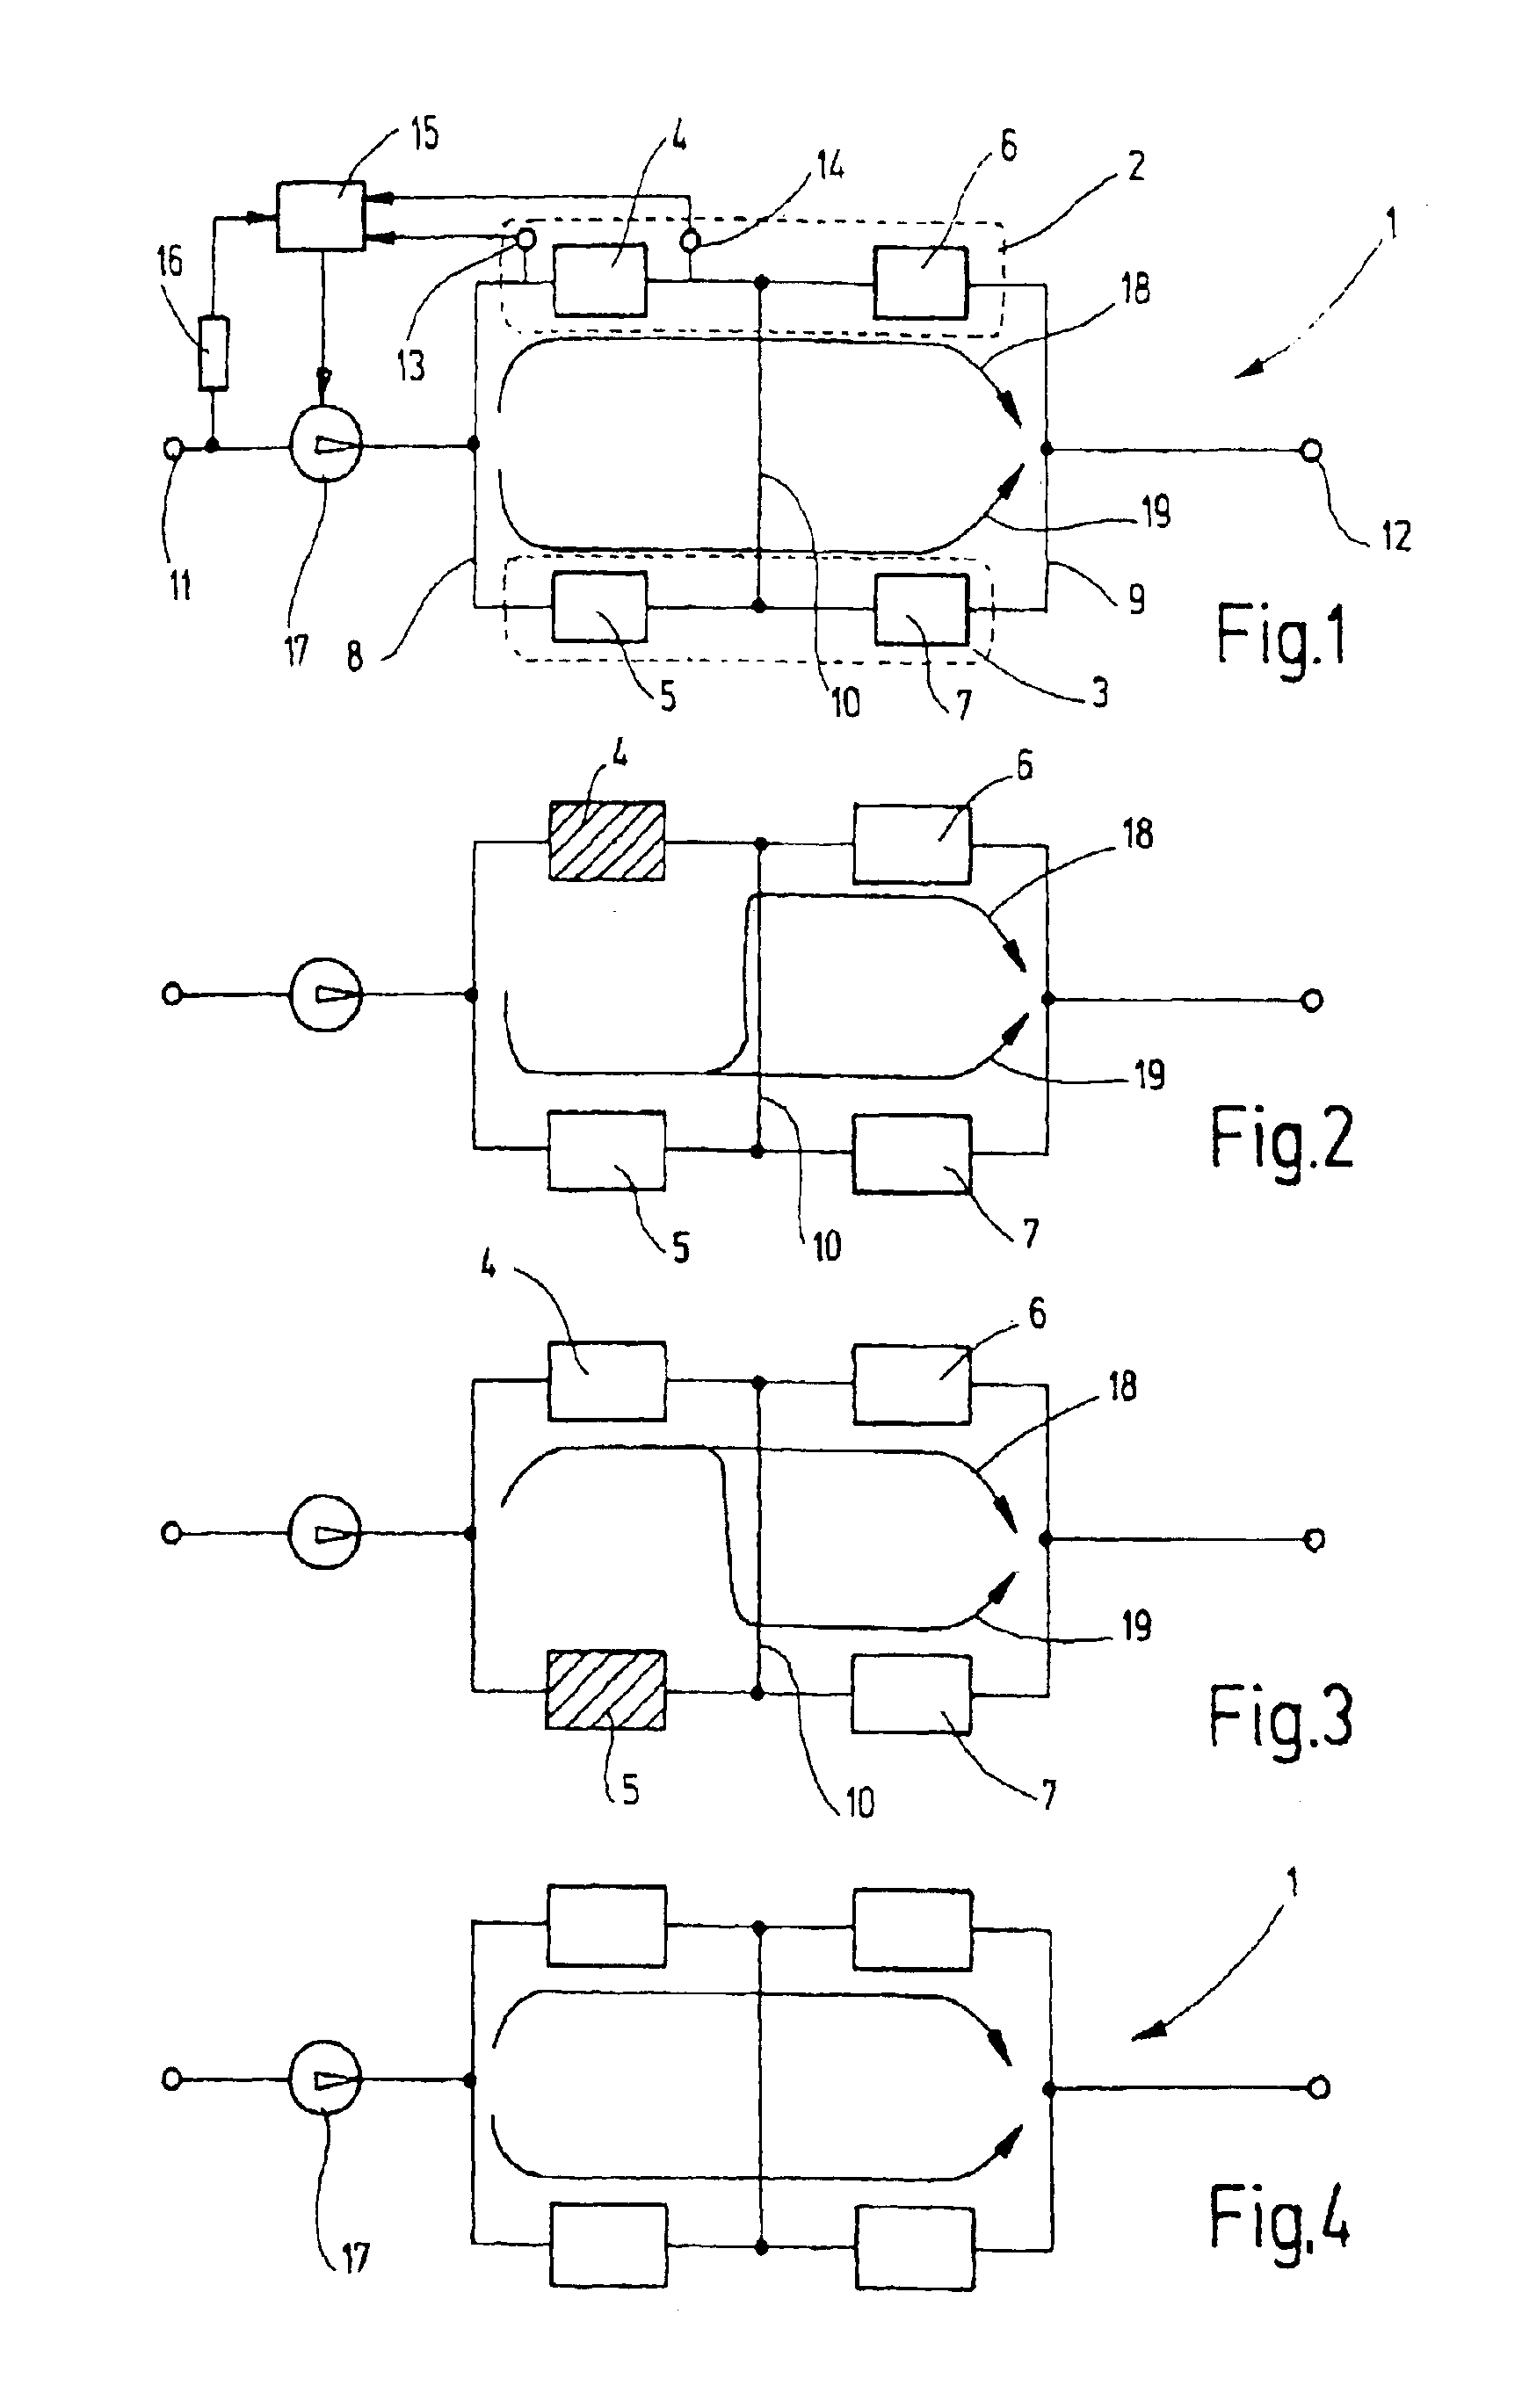 Method and device for filtering liquids, especially drinks